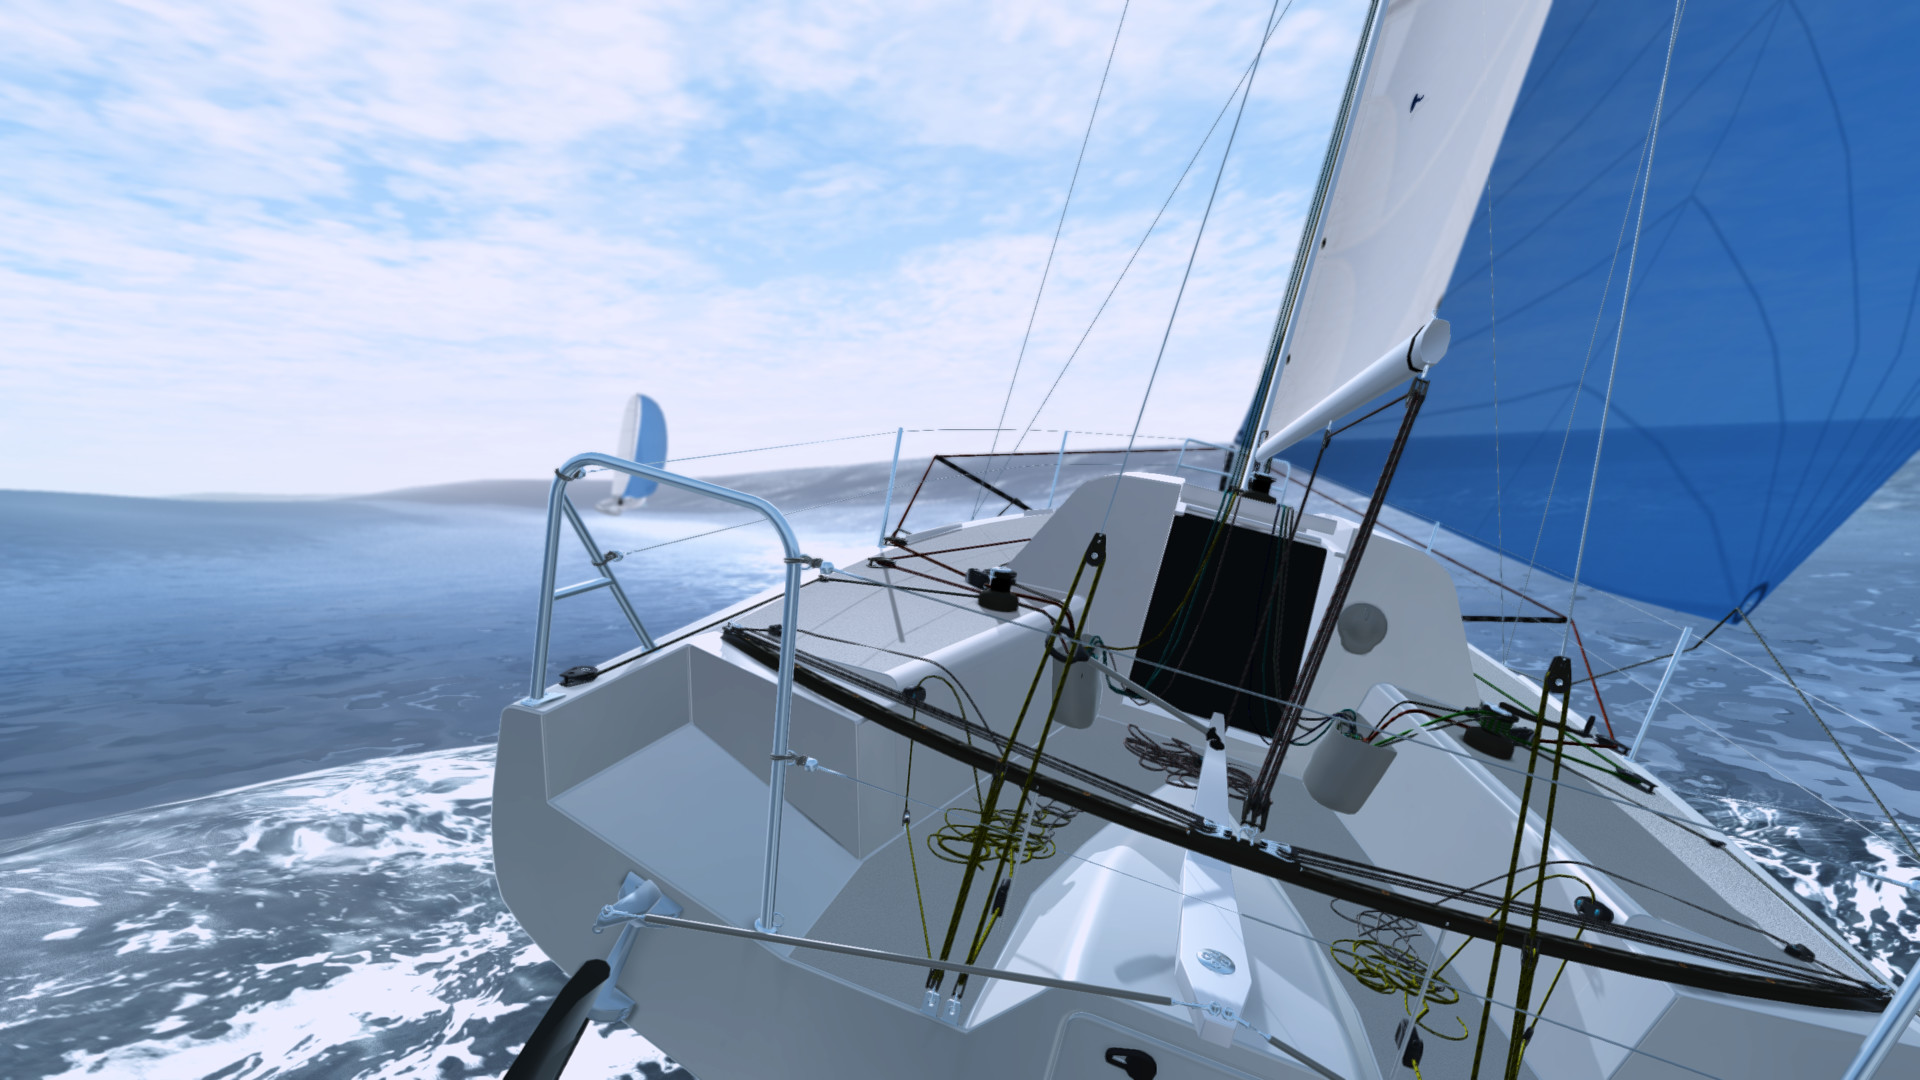 Is this multiplayer sailing sim quiet and serene, or is everybody just ignoring me? PC Gamer